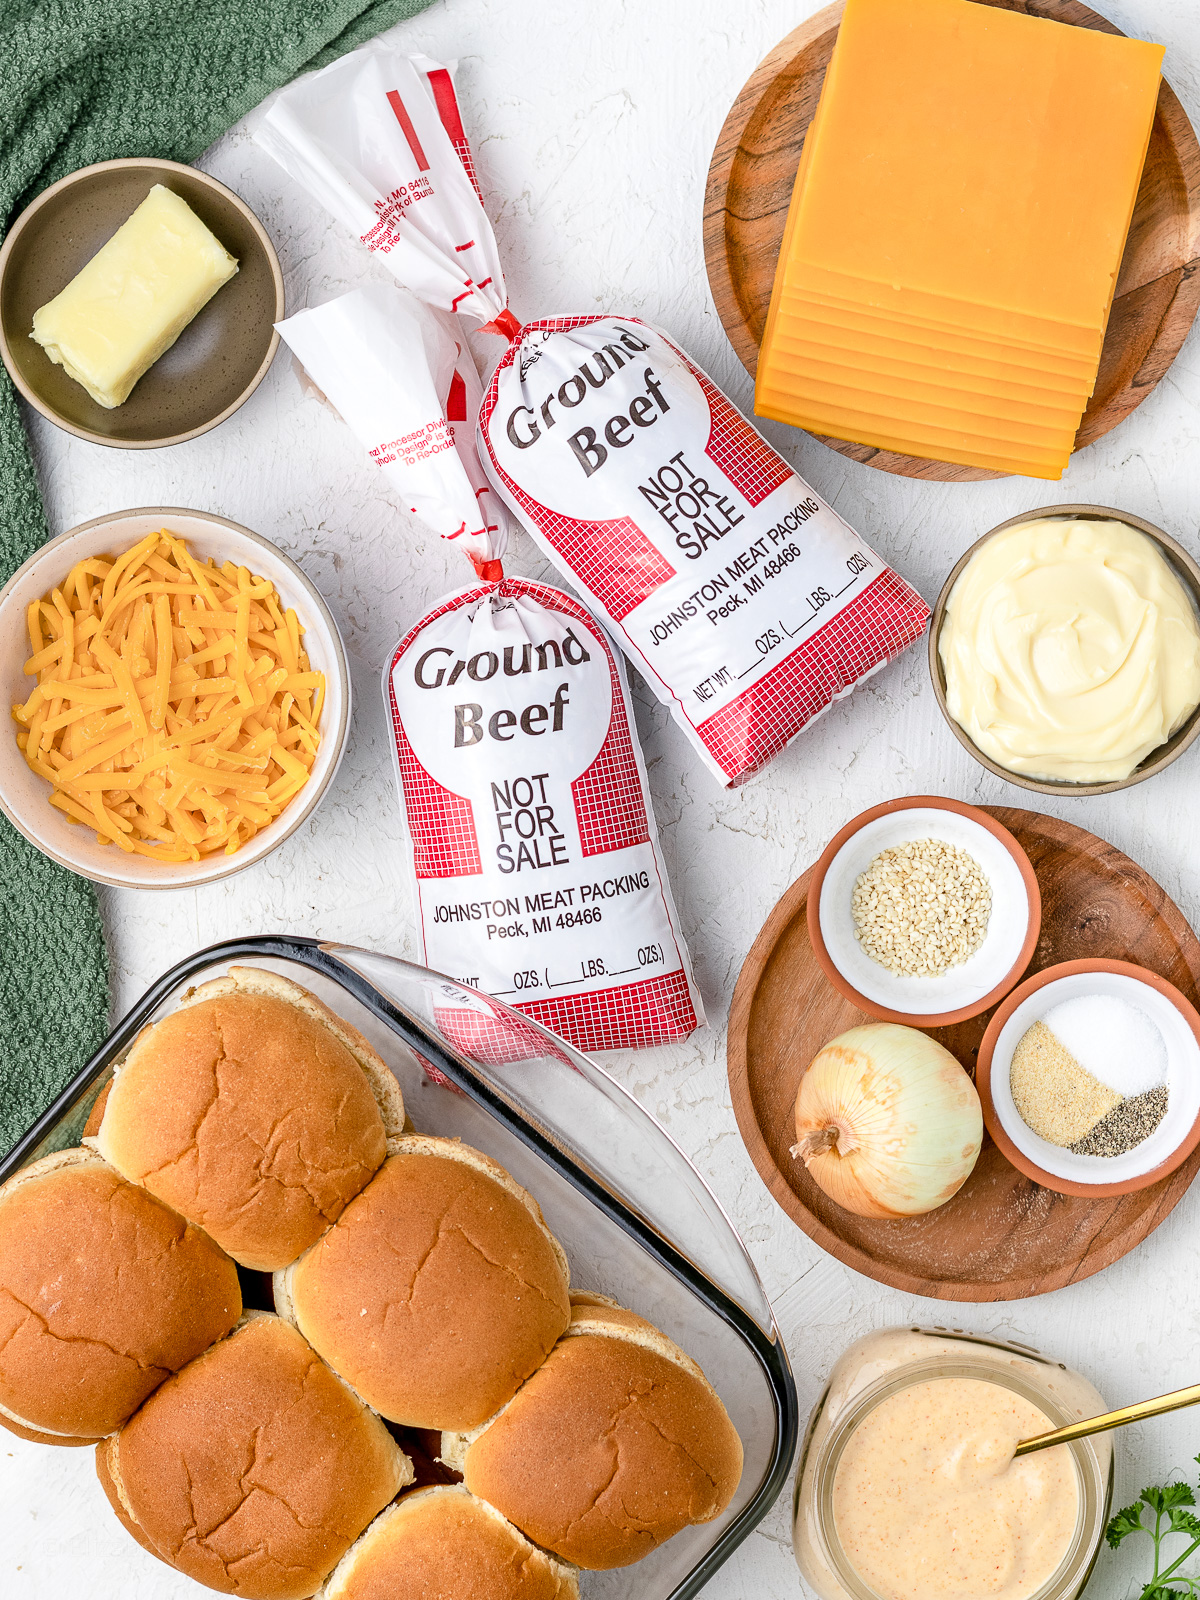 Ingredients needed to make cheesy ground beef sliders with a sriracha aioli.